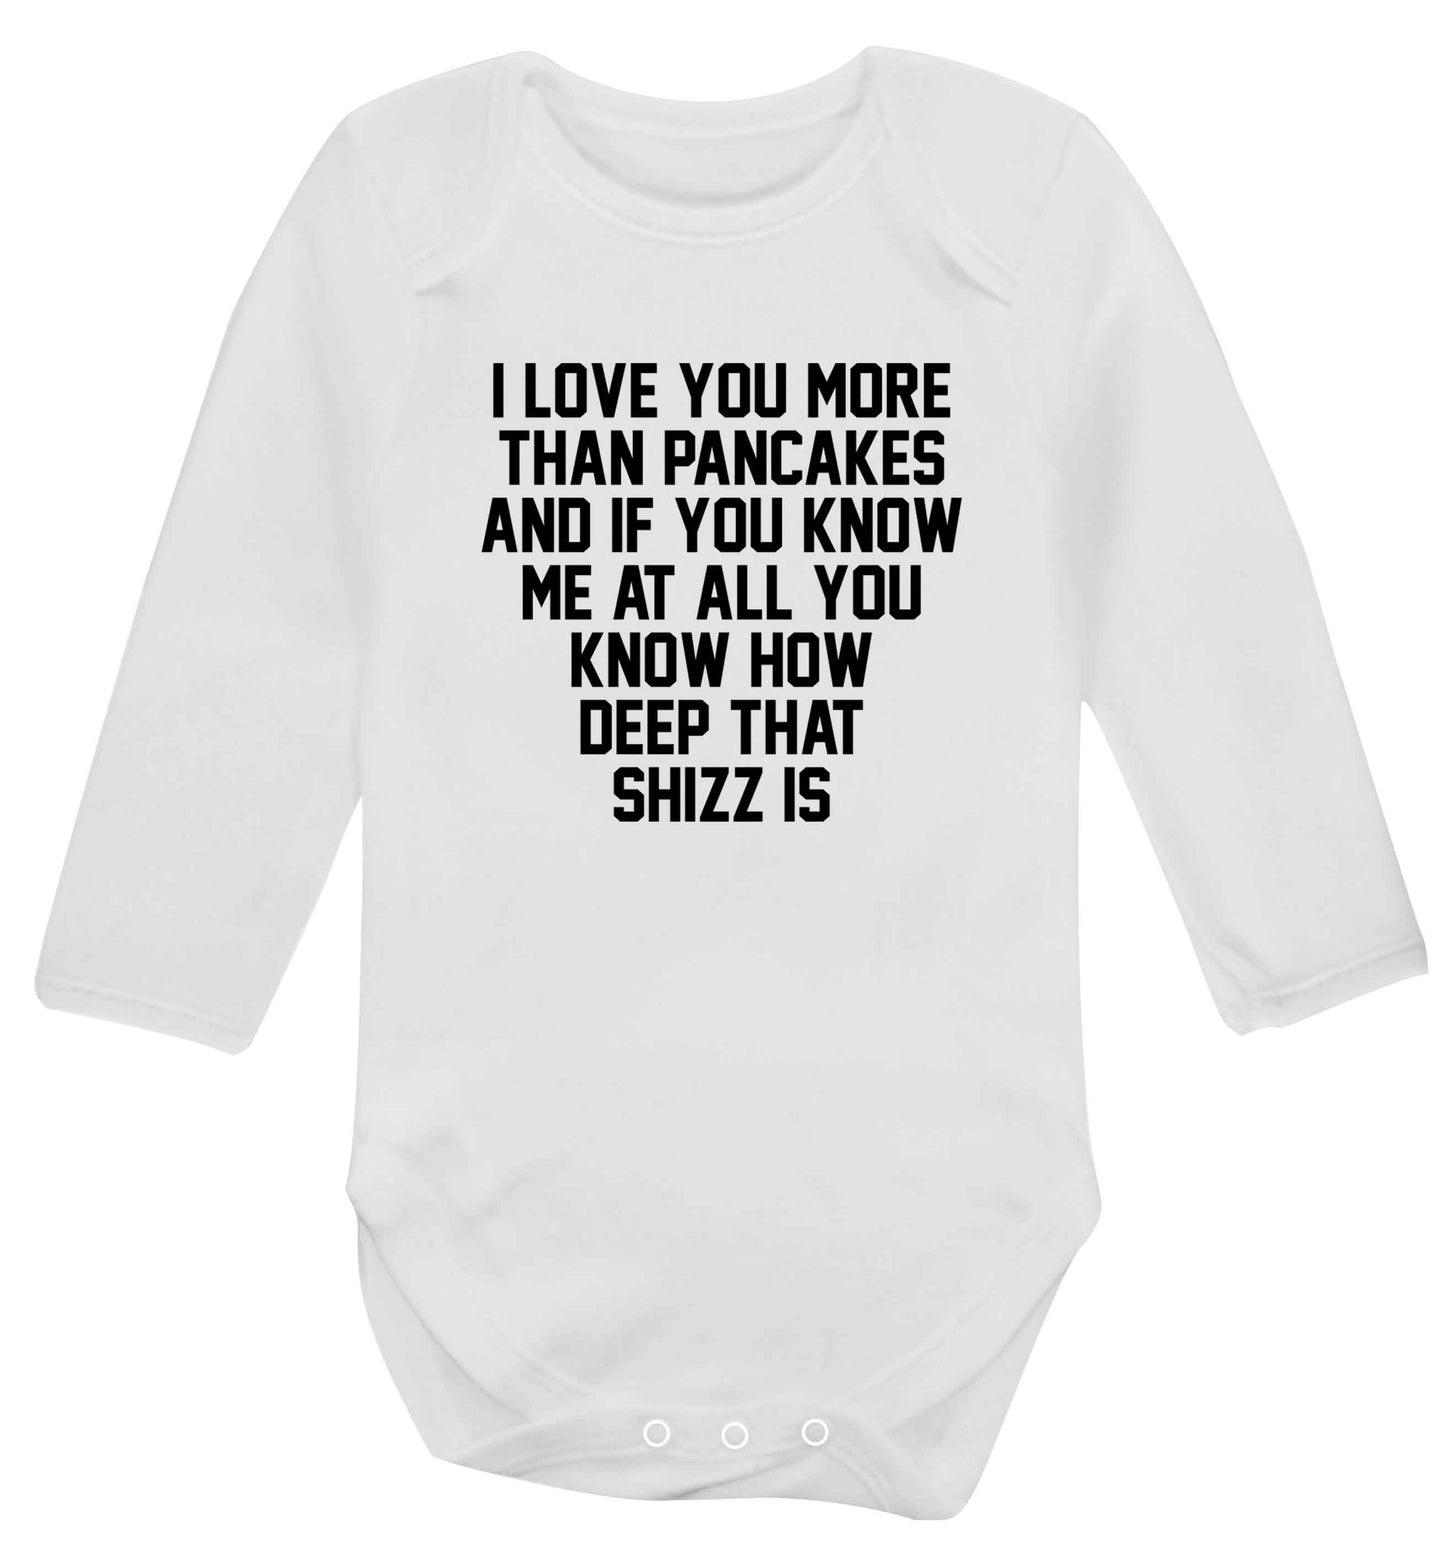 I love you more than pancakes and if you know me at all you know how deep that shizz is baby vest long sleeved white 6-12 months